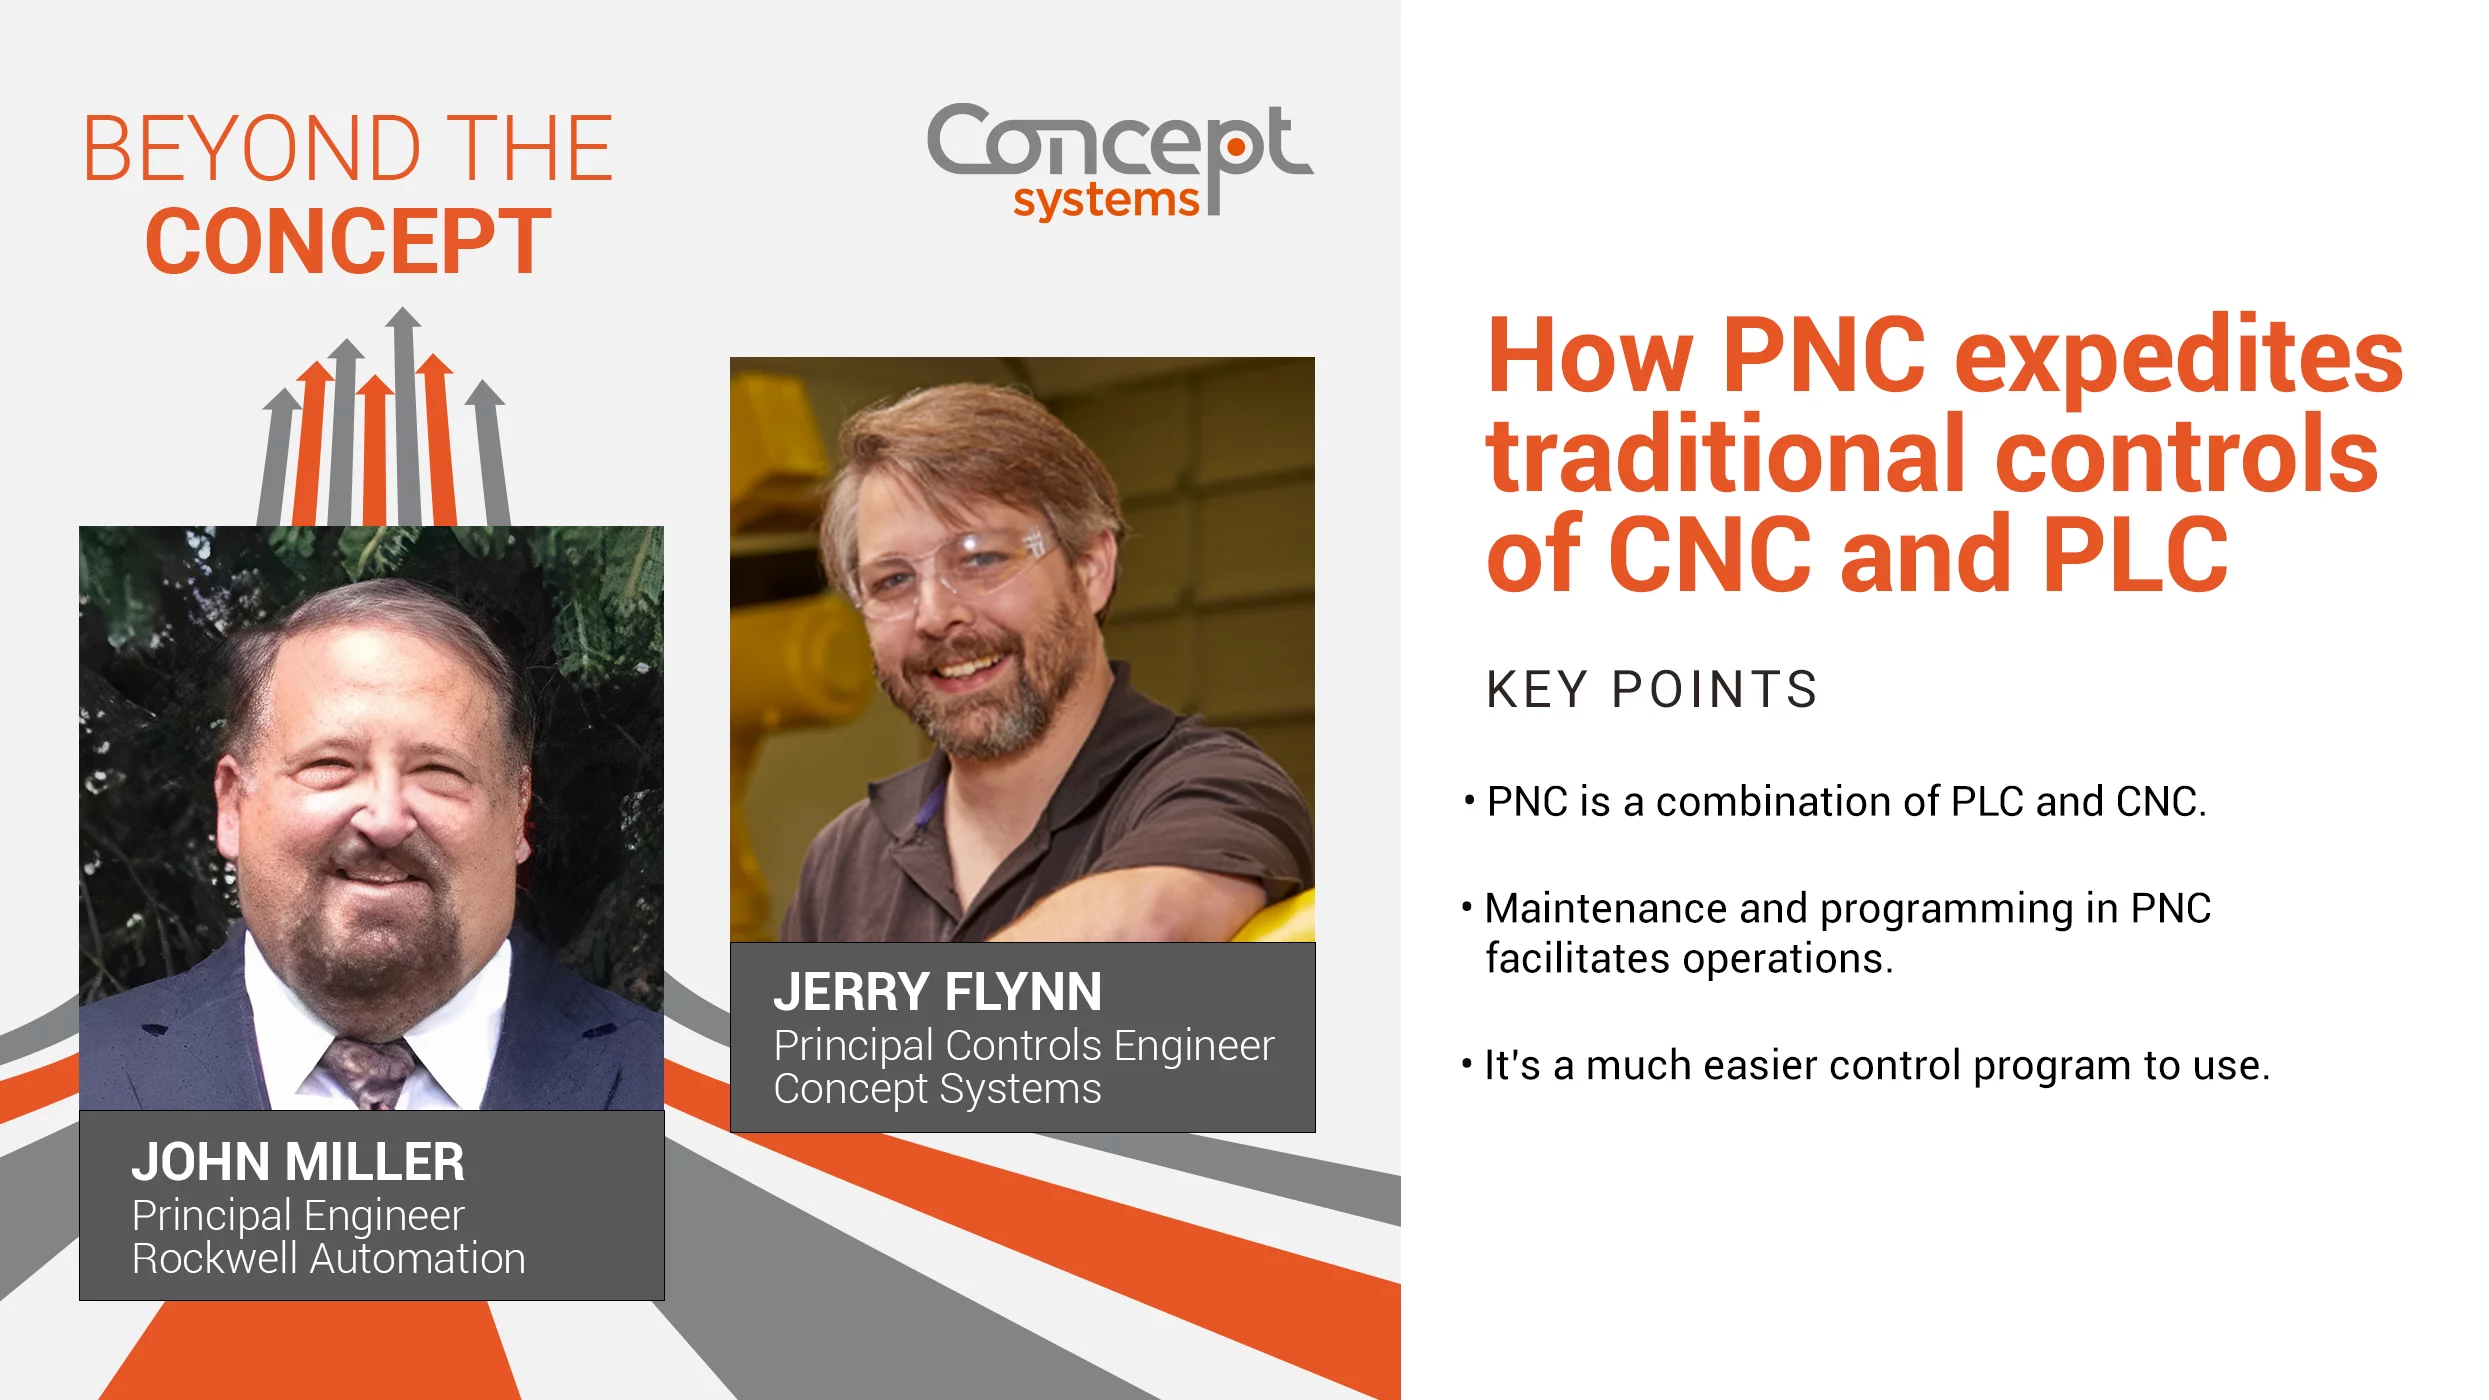 How PNC expedites traditional controls of CNC and PLC